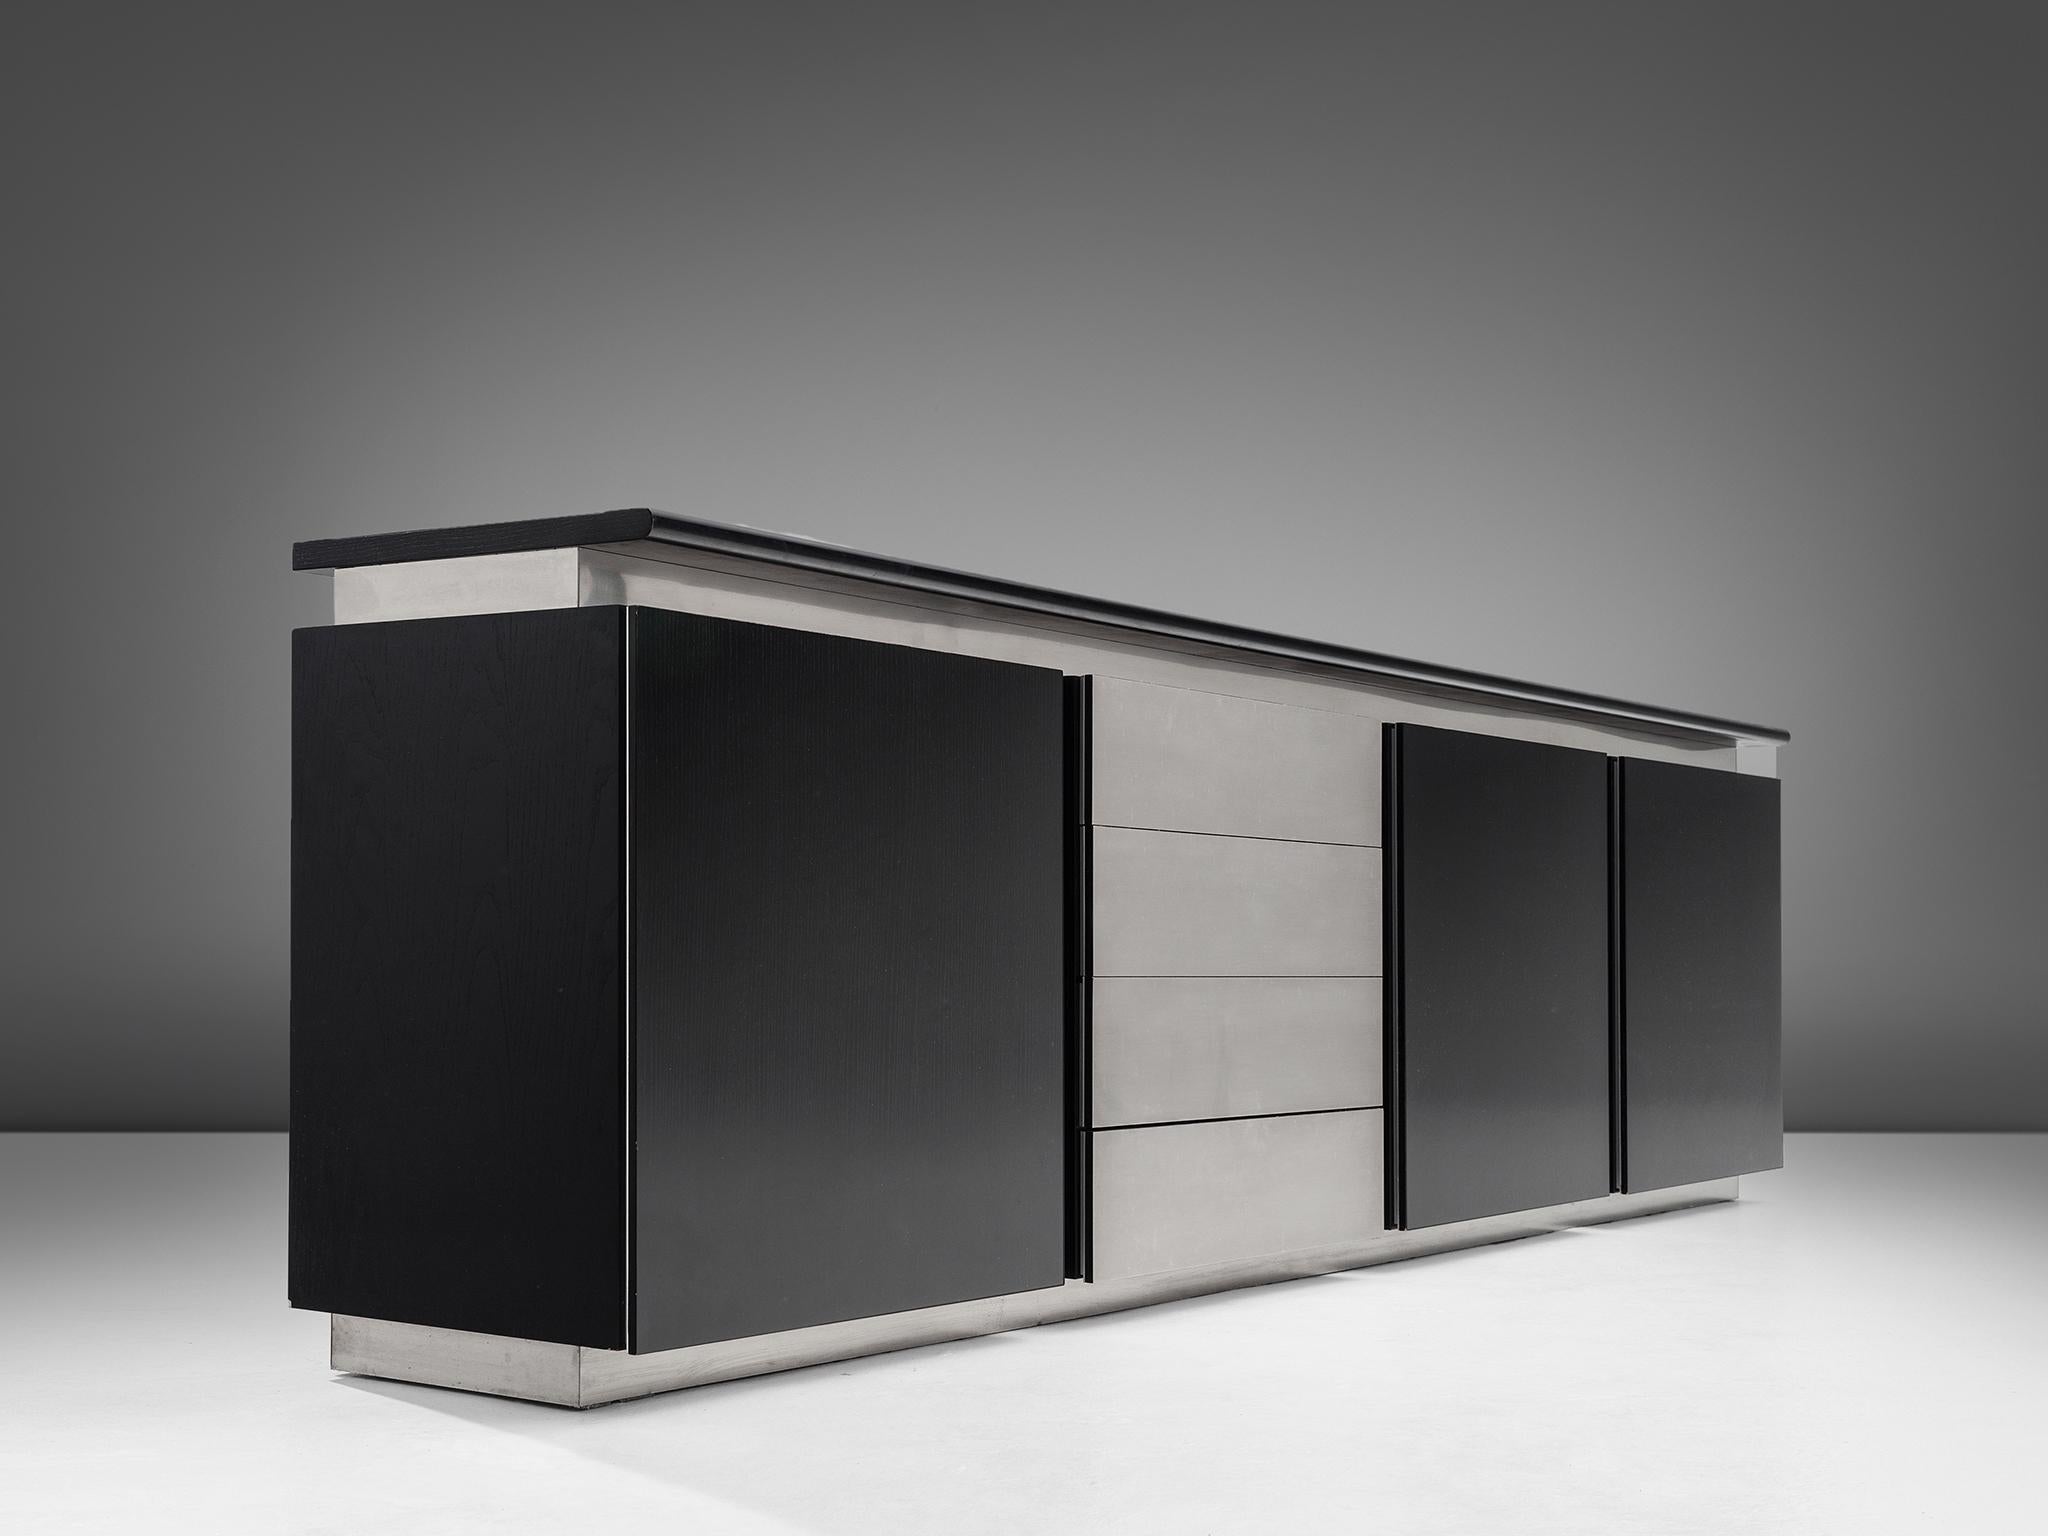 Ludovico Acerbis for Acerbis, sideboard, black lacquered wood and steel, 1970s, Italy.

Sleek and modern credenza in stainless steel and stained oak is designed by Ludocivo Acerbis (1939). This cabinet has both a contemporary yet monumental